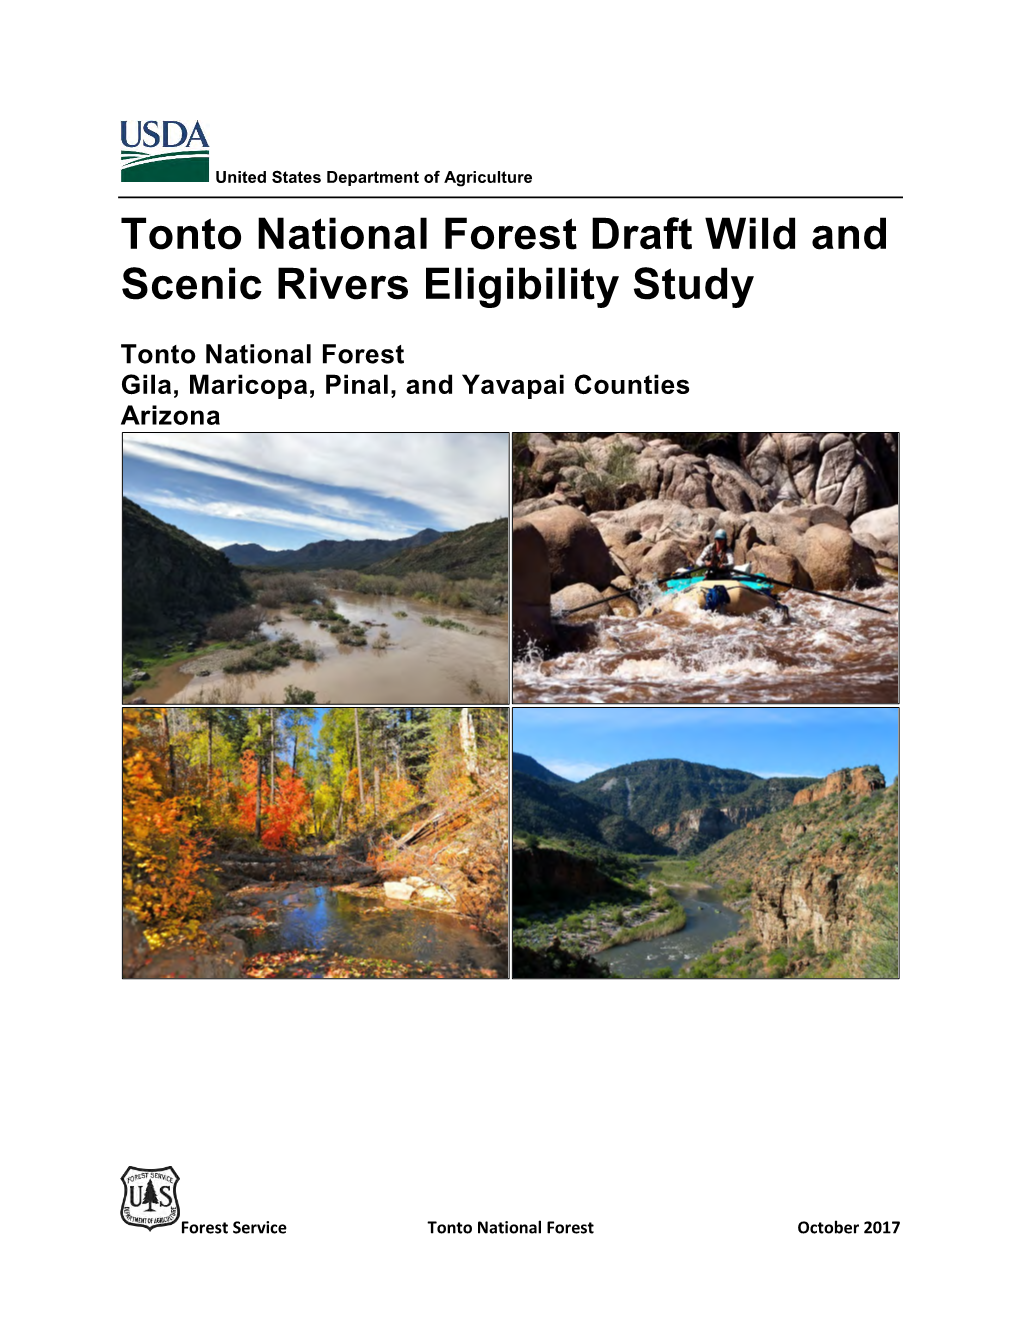 Tonto National Forest Draft Wild & Scenic Rivers Eligibility Study